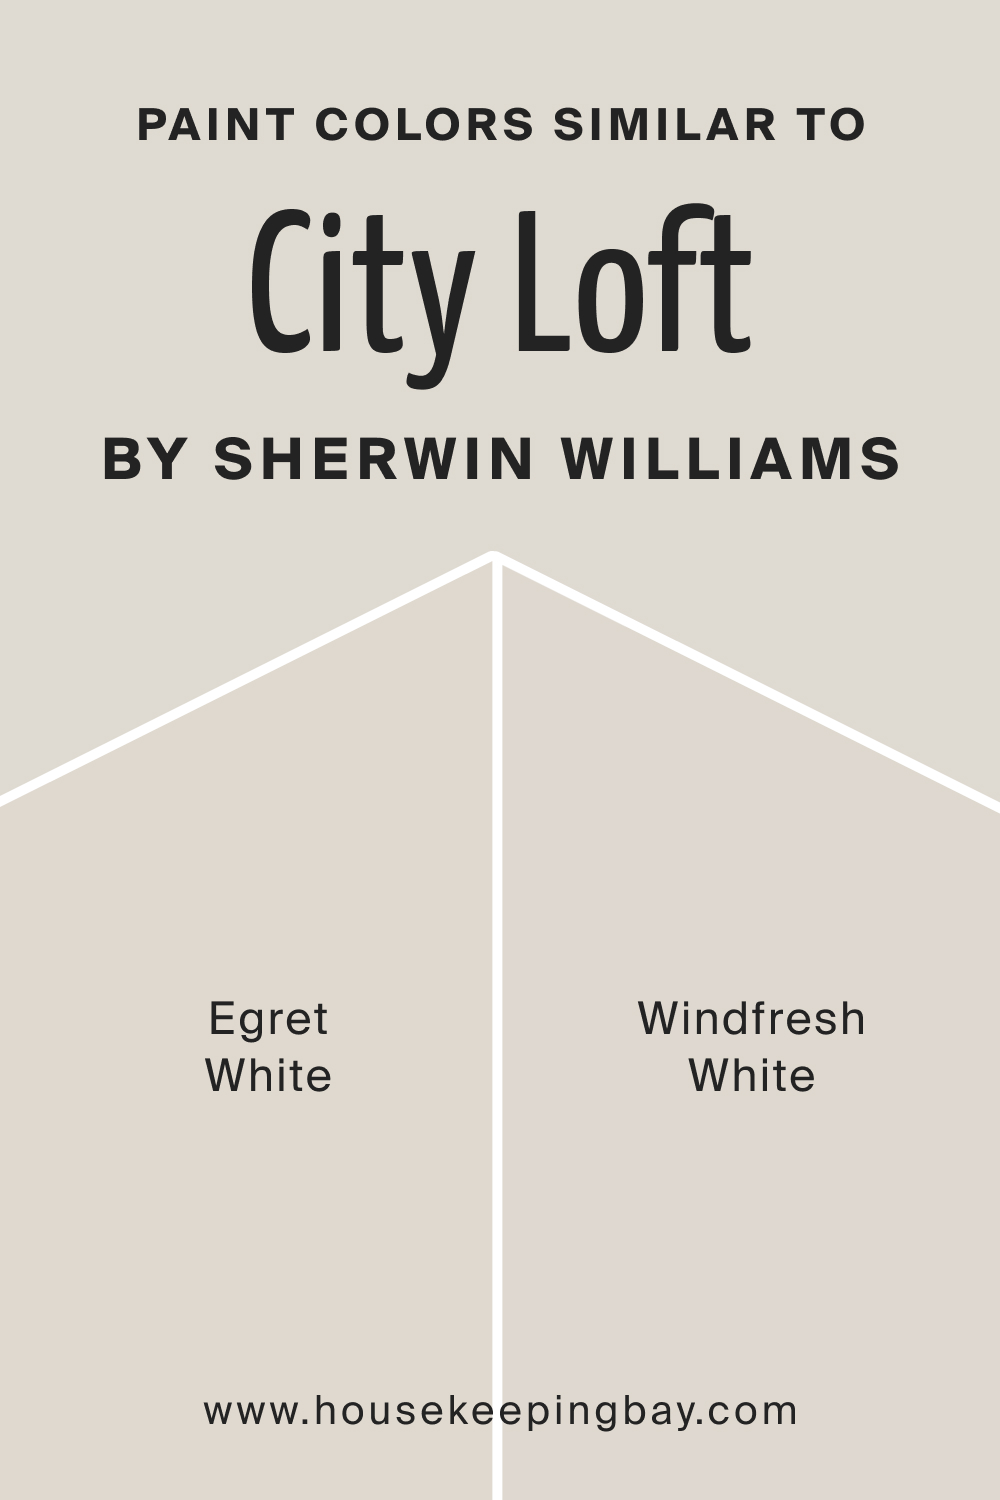 Paint Colors Similar to City Loft SW 7631 by Sherwin Williams